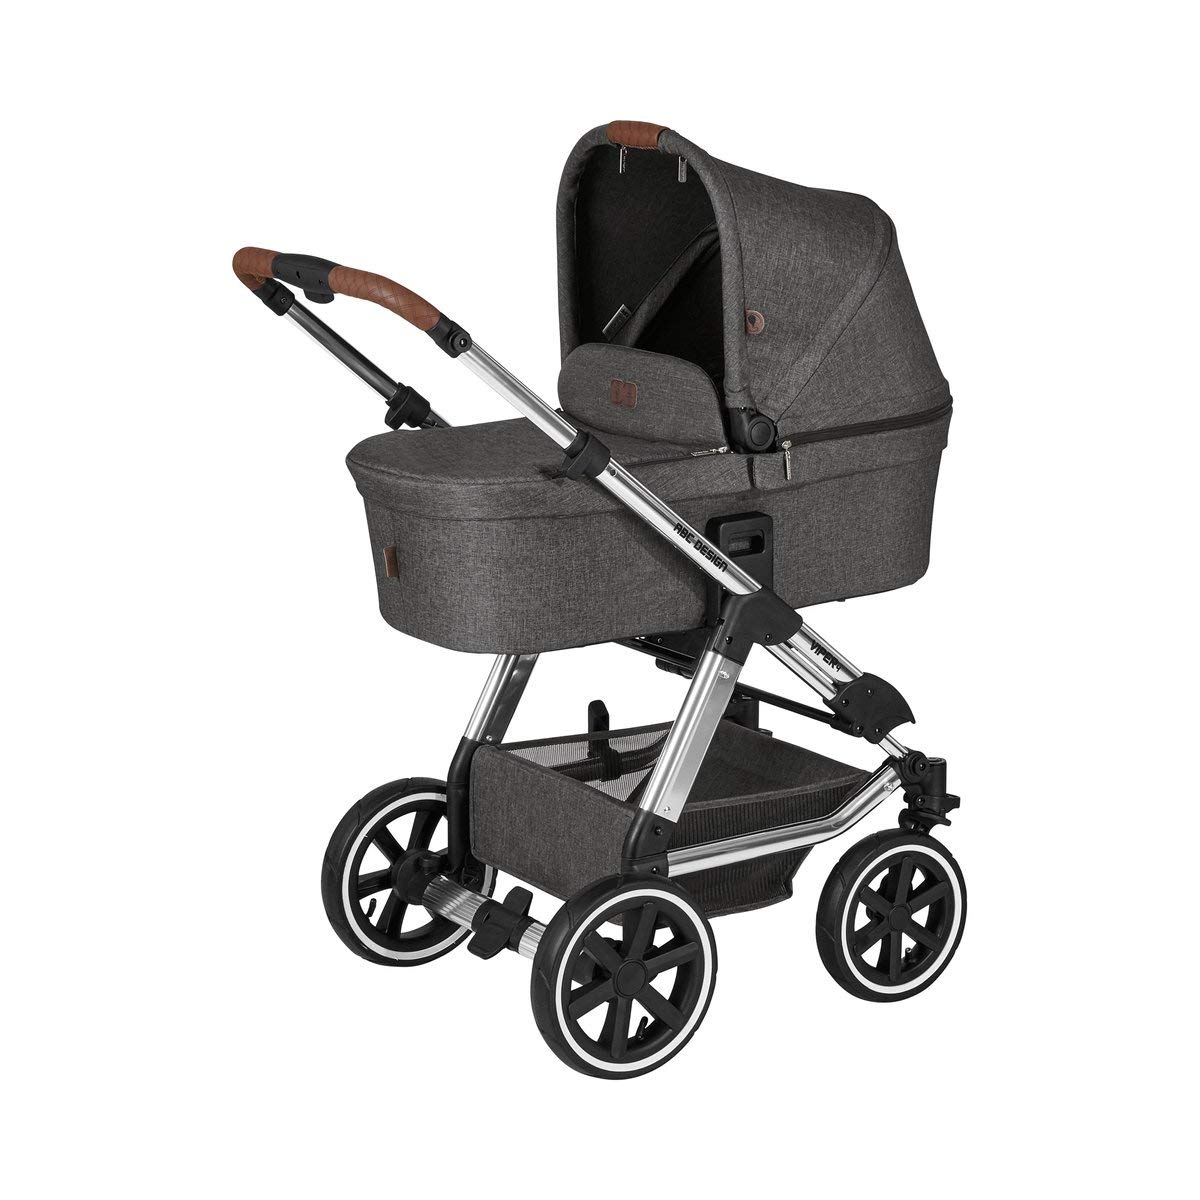 ABC Design 2 in 1 Viper 4 Diamond Edition Pushchair - Combination Pushchair for Newborns & Babies up to 22 kg - Off-Road - Wheel Suspension & Pneumatic Wheels - Height Adjustable Pusher - Colour: Asphalt